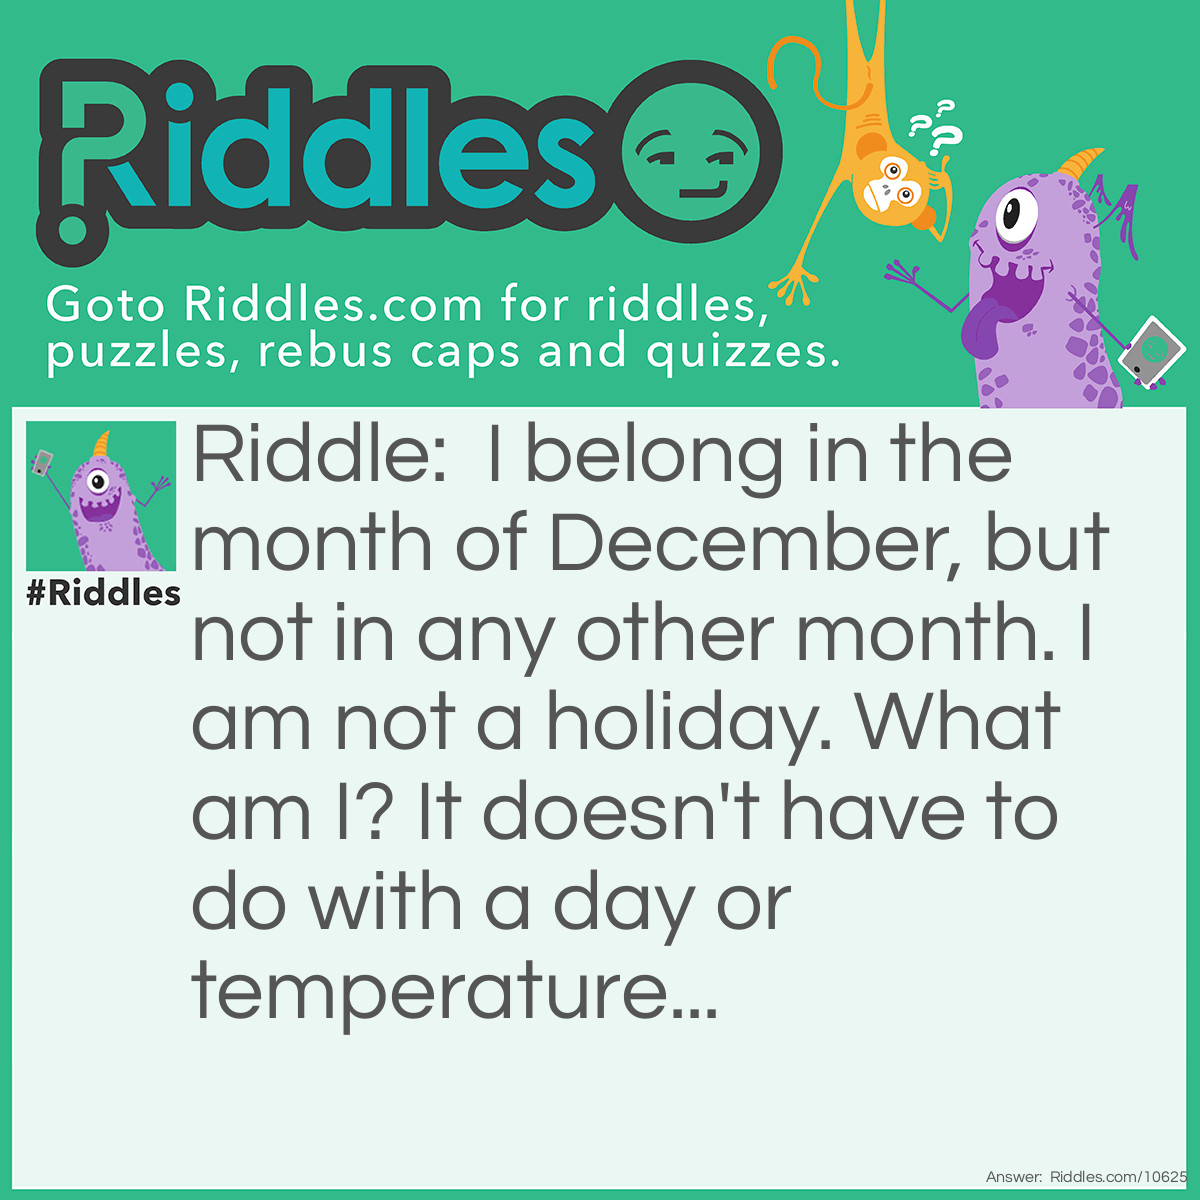 Riddle: I belong in the month of December, but not in any other month. I am not a holiday. What am I? It doesn't have to do with a day or temperature... Answer: The letter D.